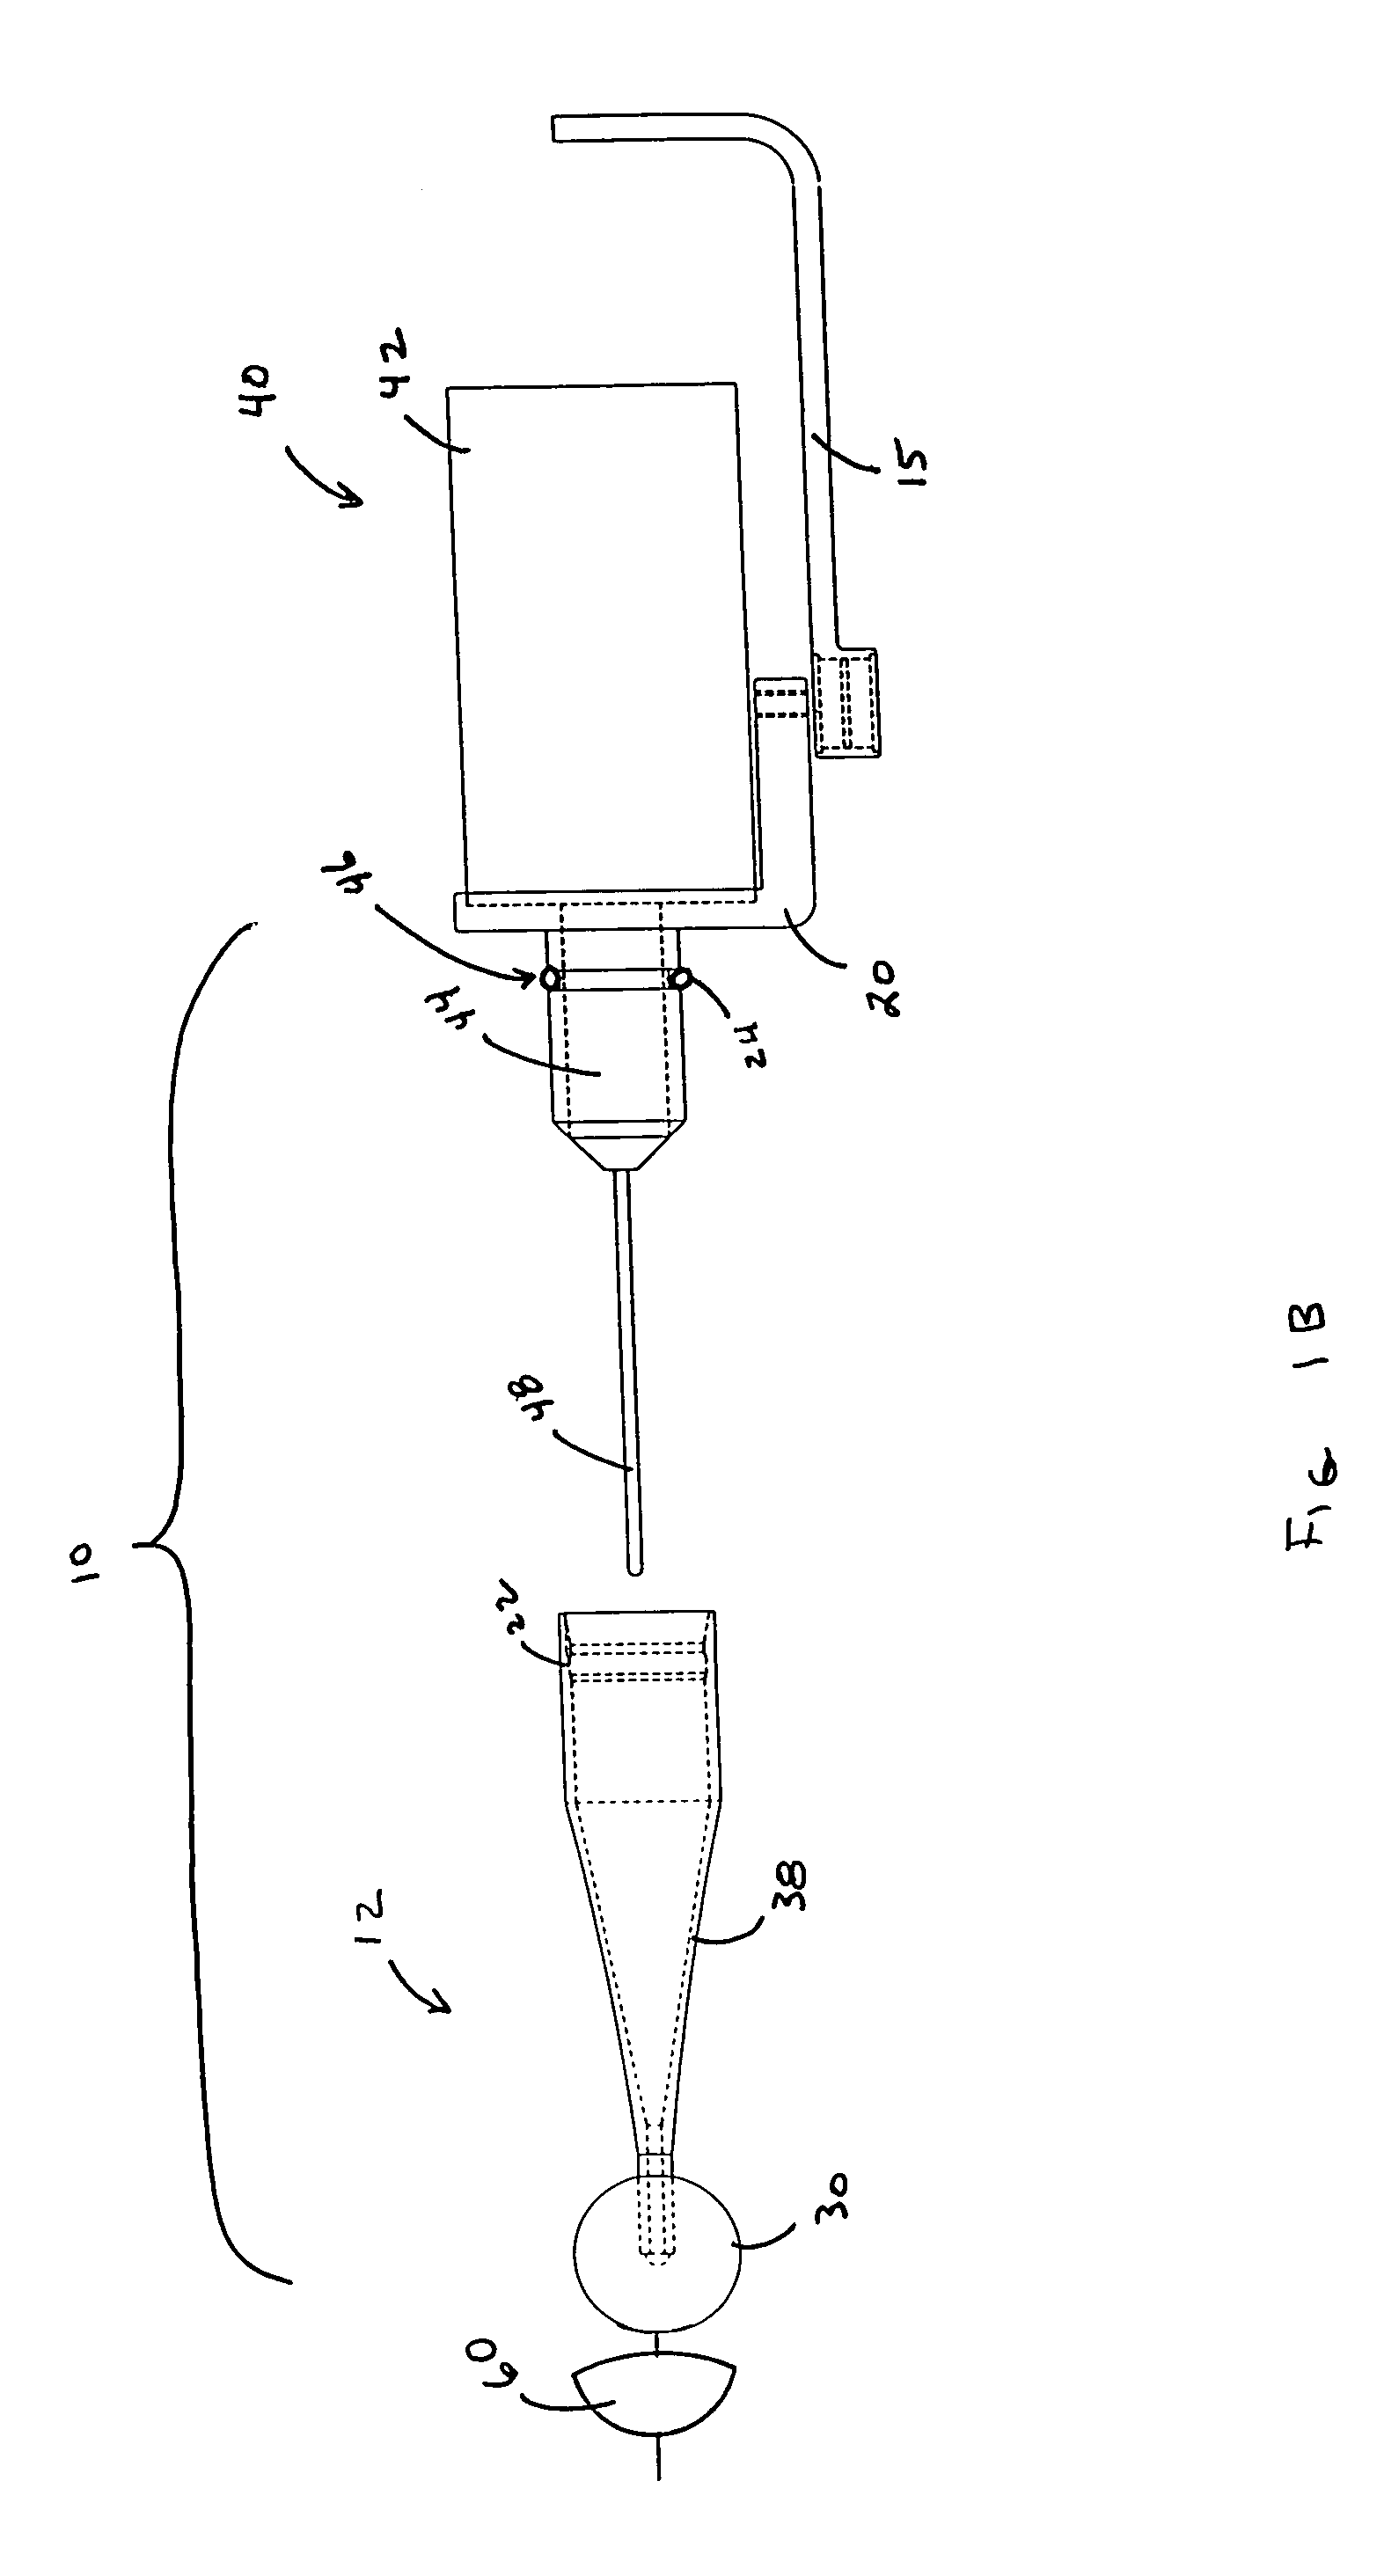 Shaped biocompatible radiation shield and method for making same